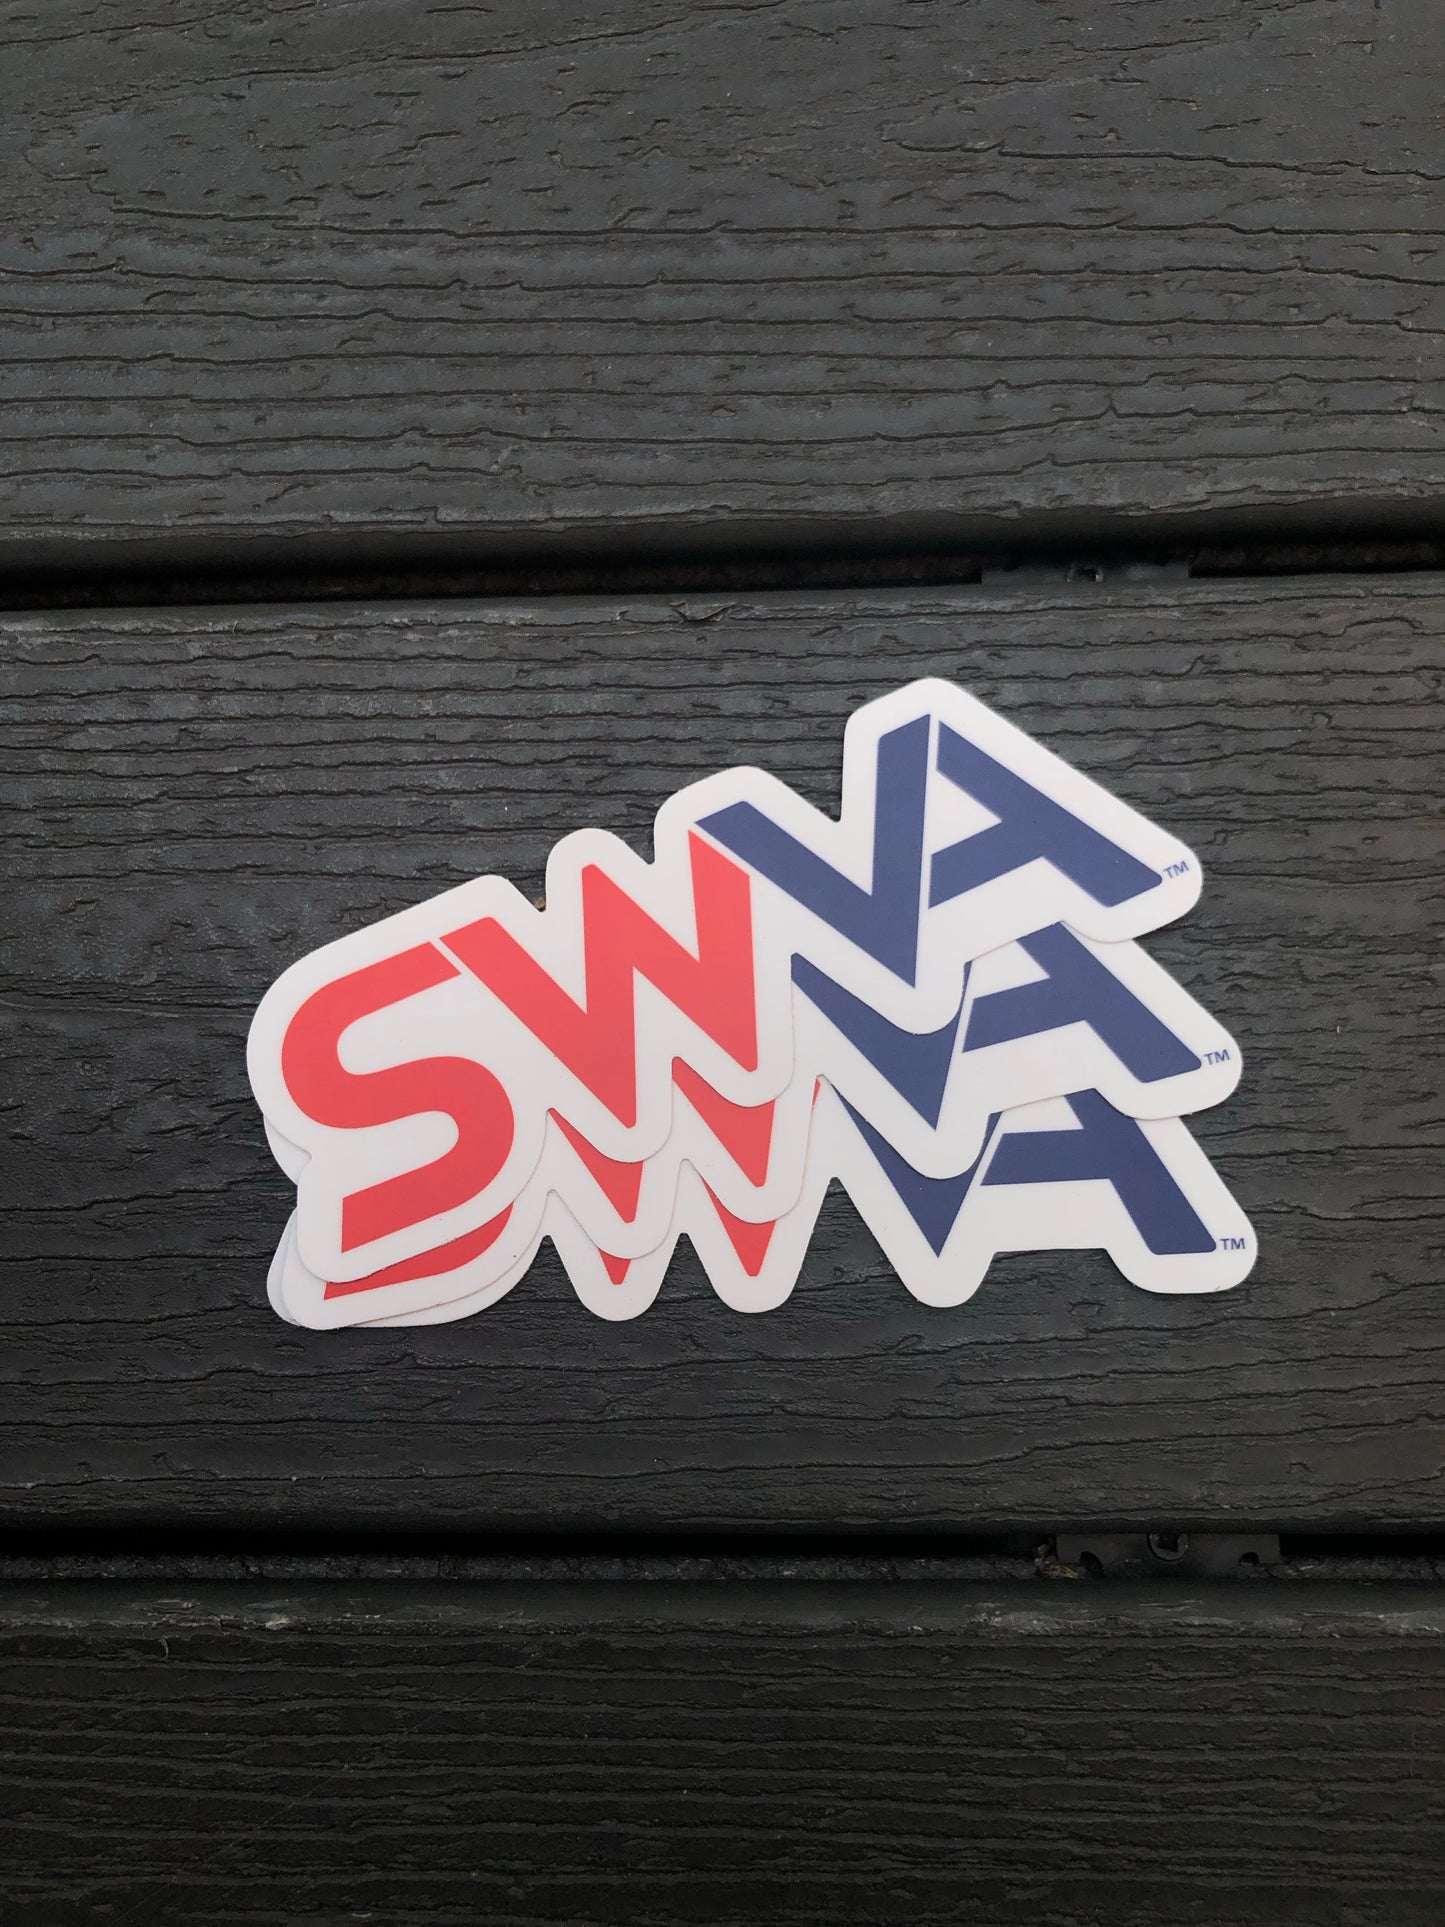 SWVA Letters Sticker (Red/Blue) - Single or 3 Pack